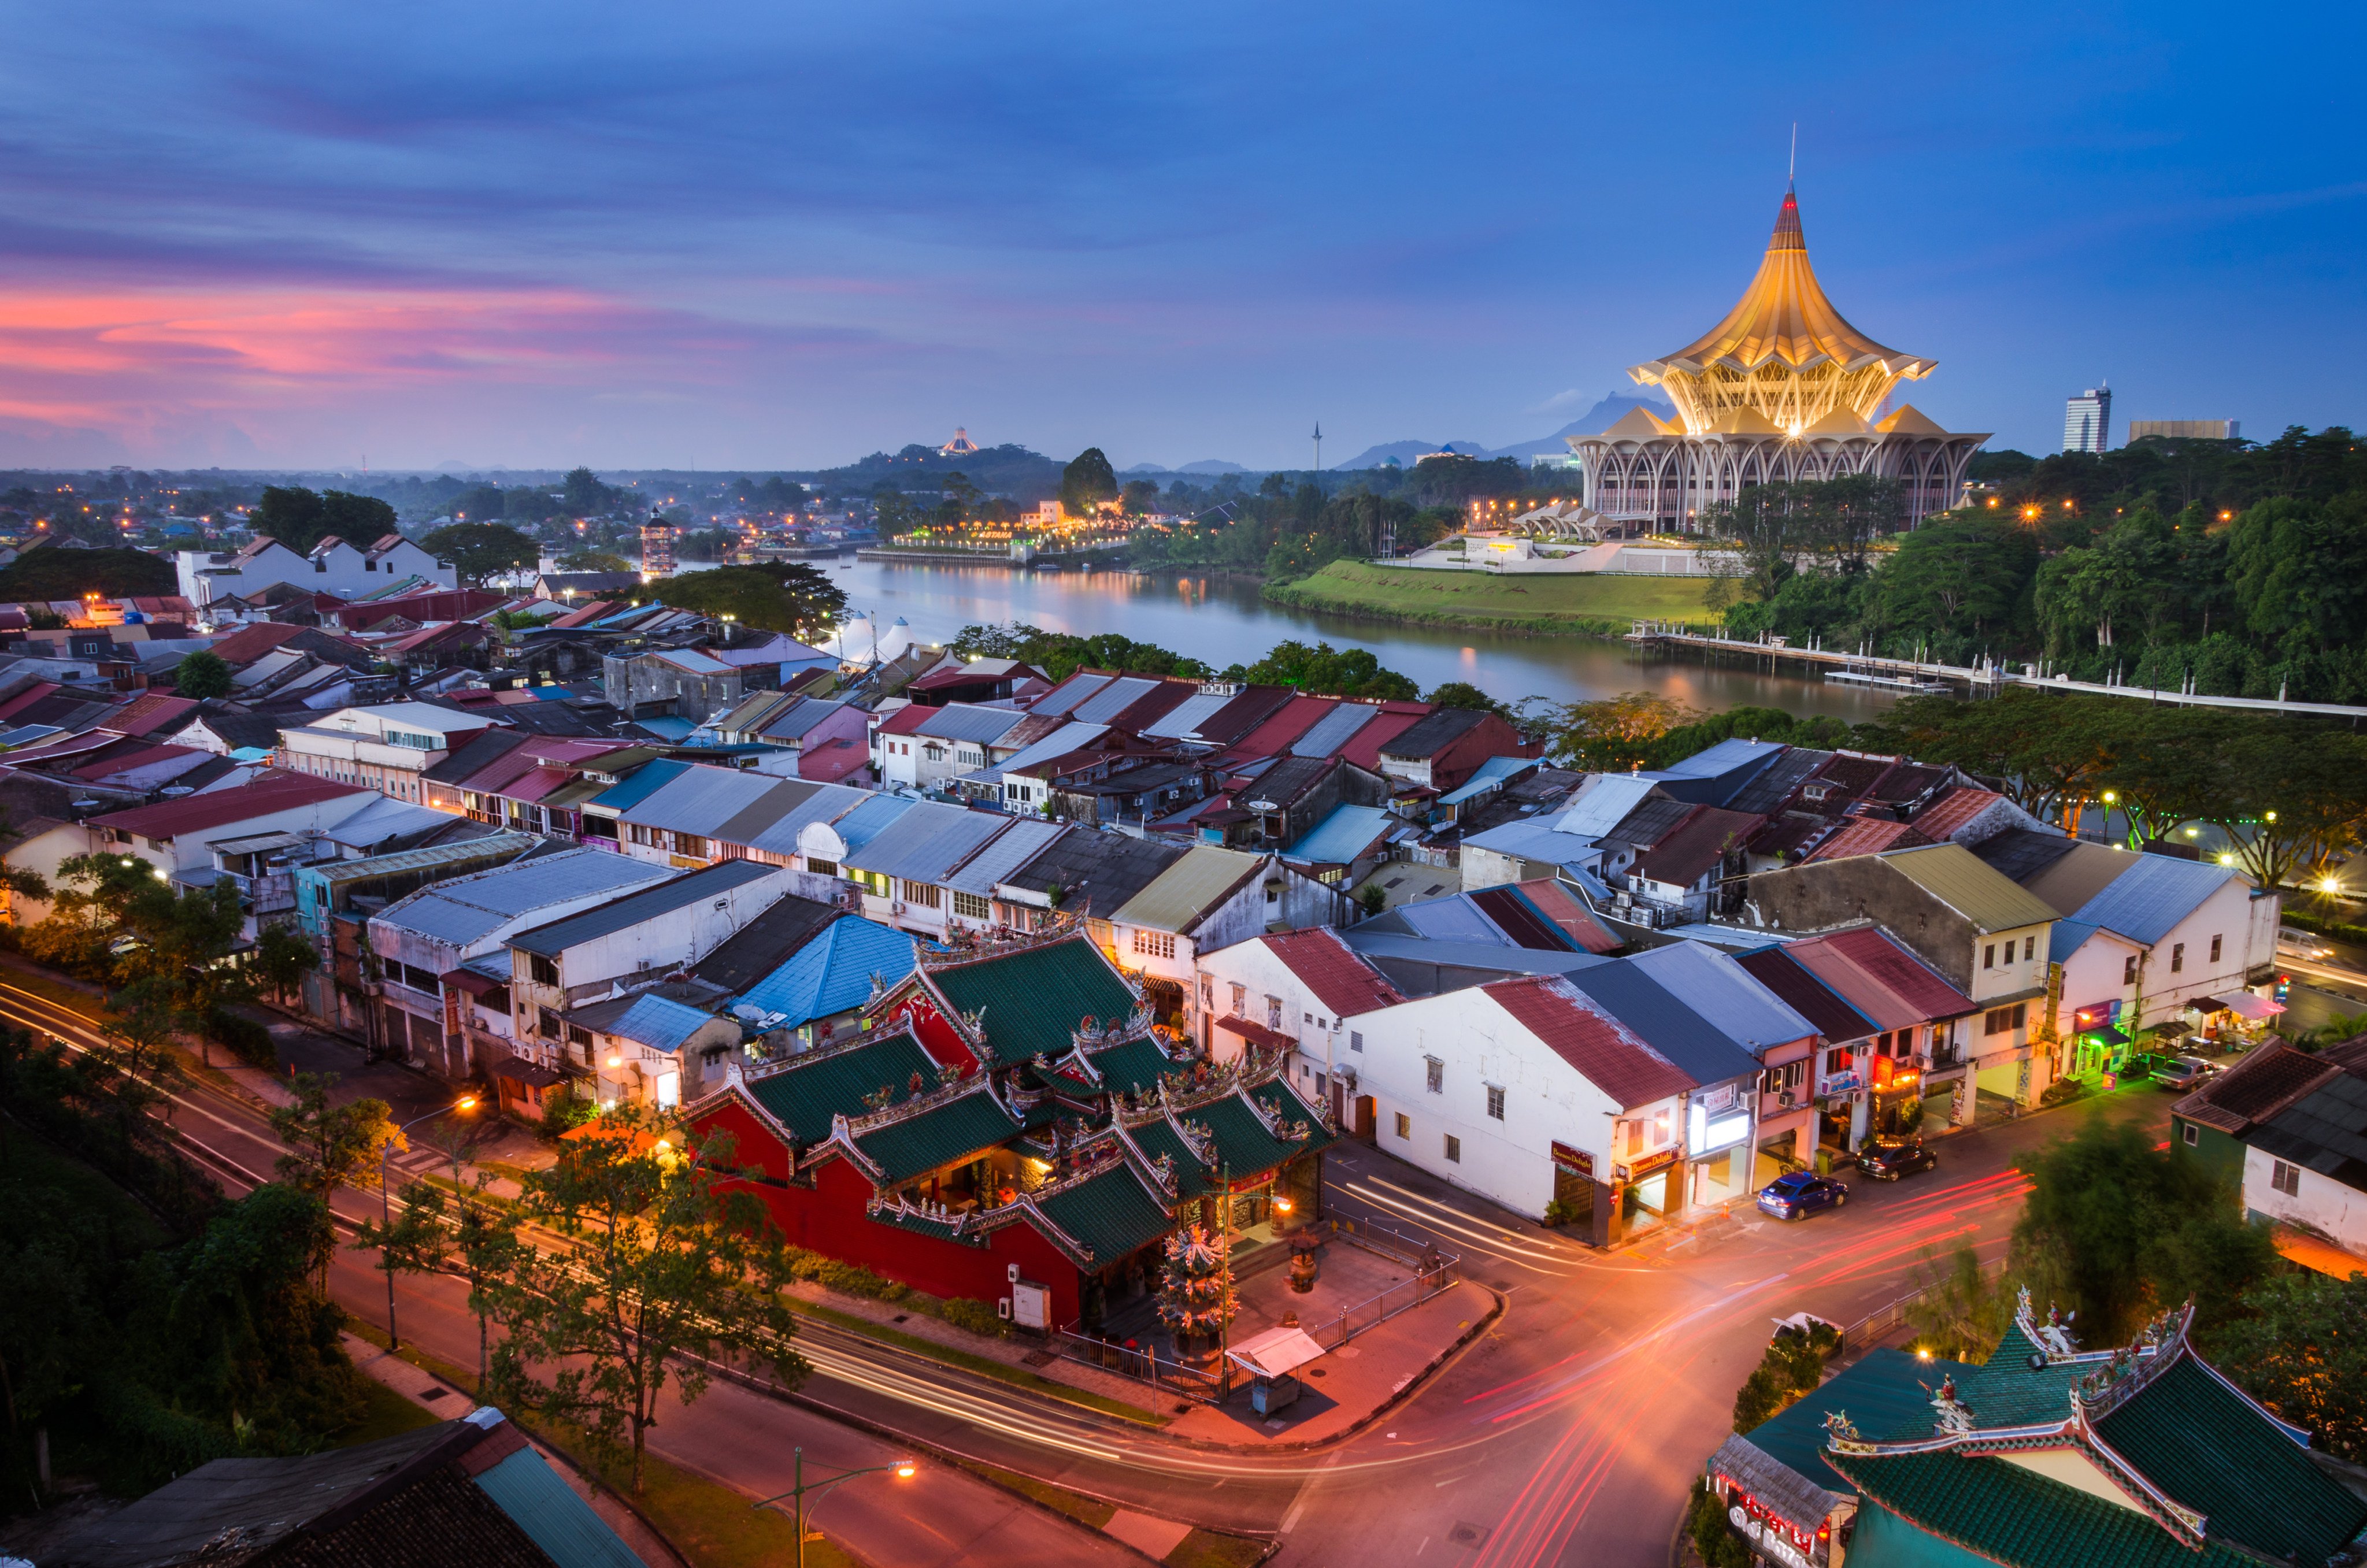 Kuching, capital of Sarawak state. There is a growing push for autonomy in Malaysia’s Sarawak state. Photo: Shutterstock.